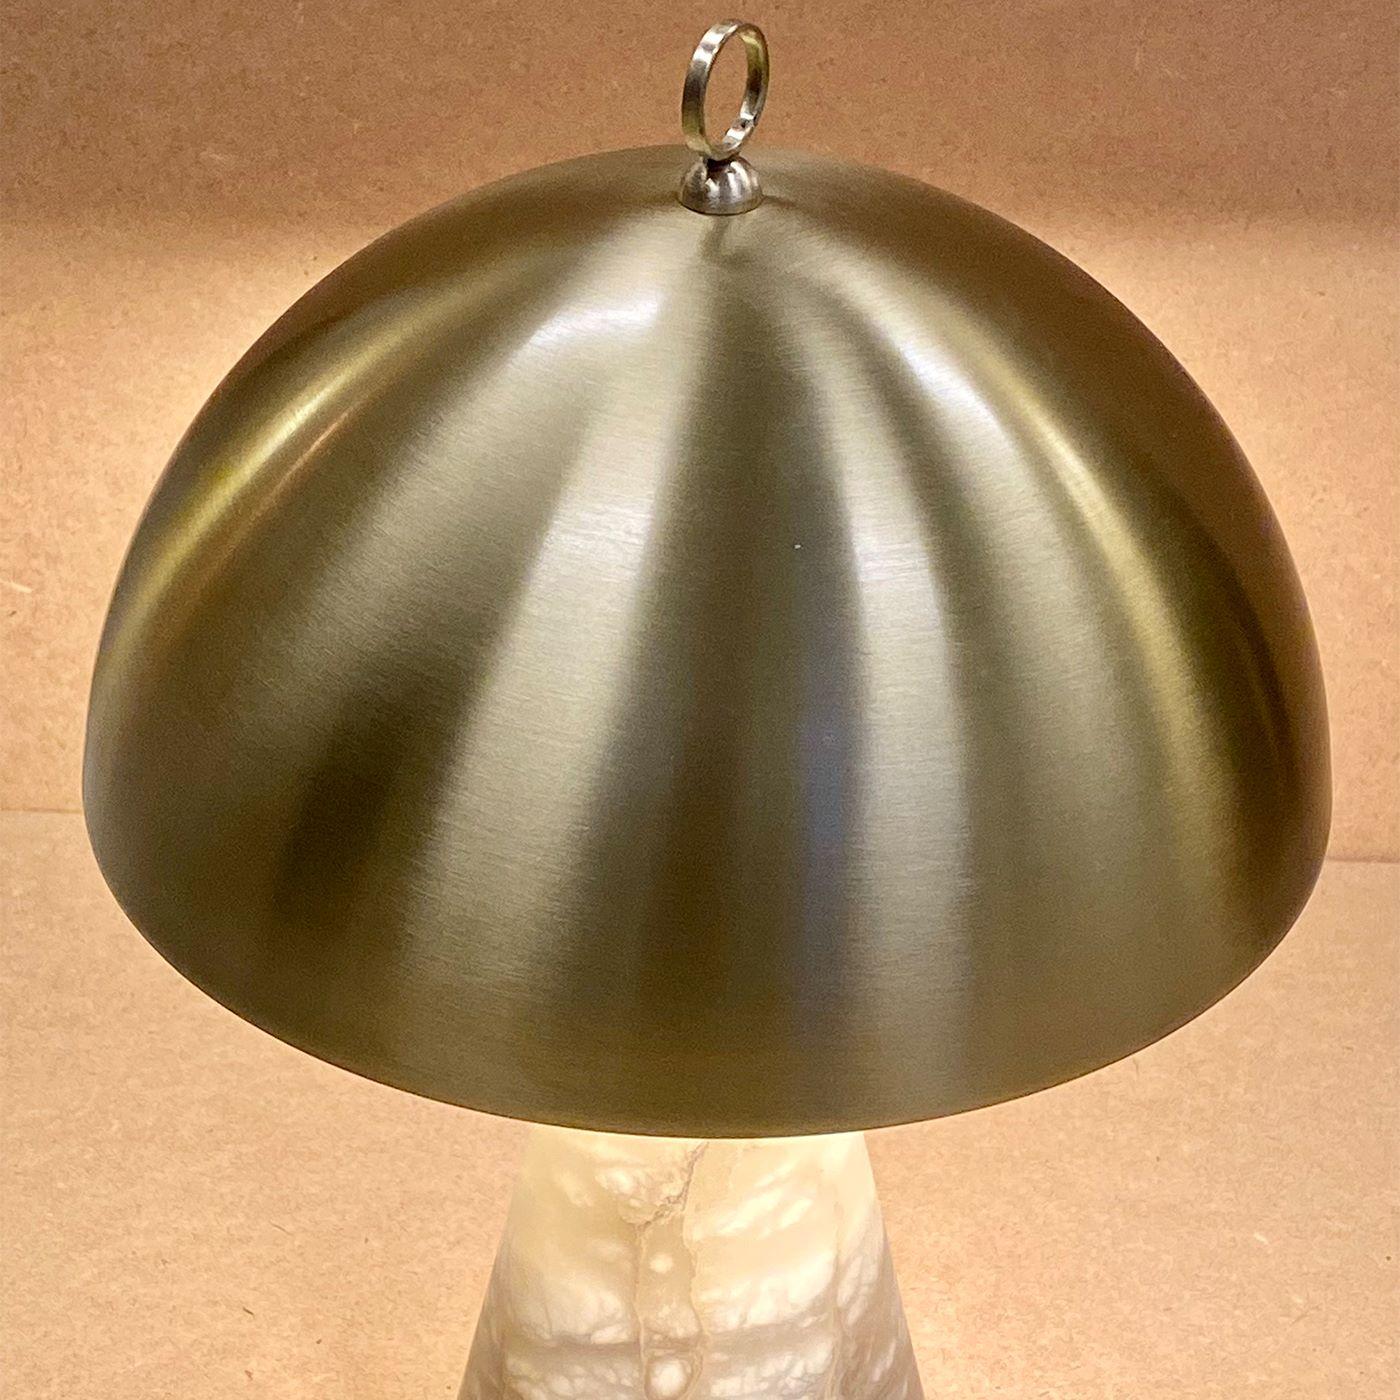 A small and compact table lamp composed of a conic alabaster base with a hand-lathered brass cover. It is suitable for bedside tables and wall cabinets. It is also available with inverted base and cover materials to match in the same ambience.